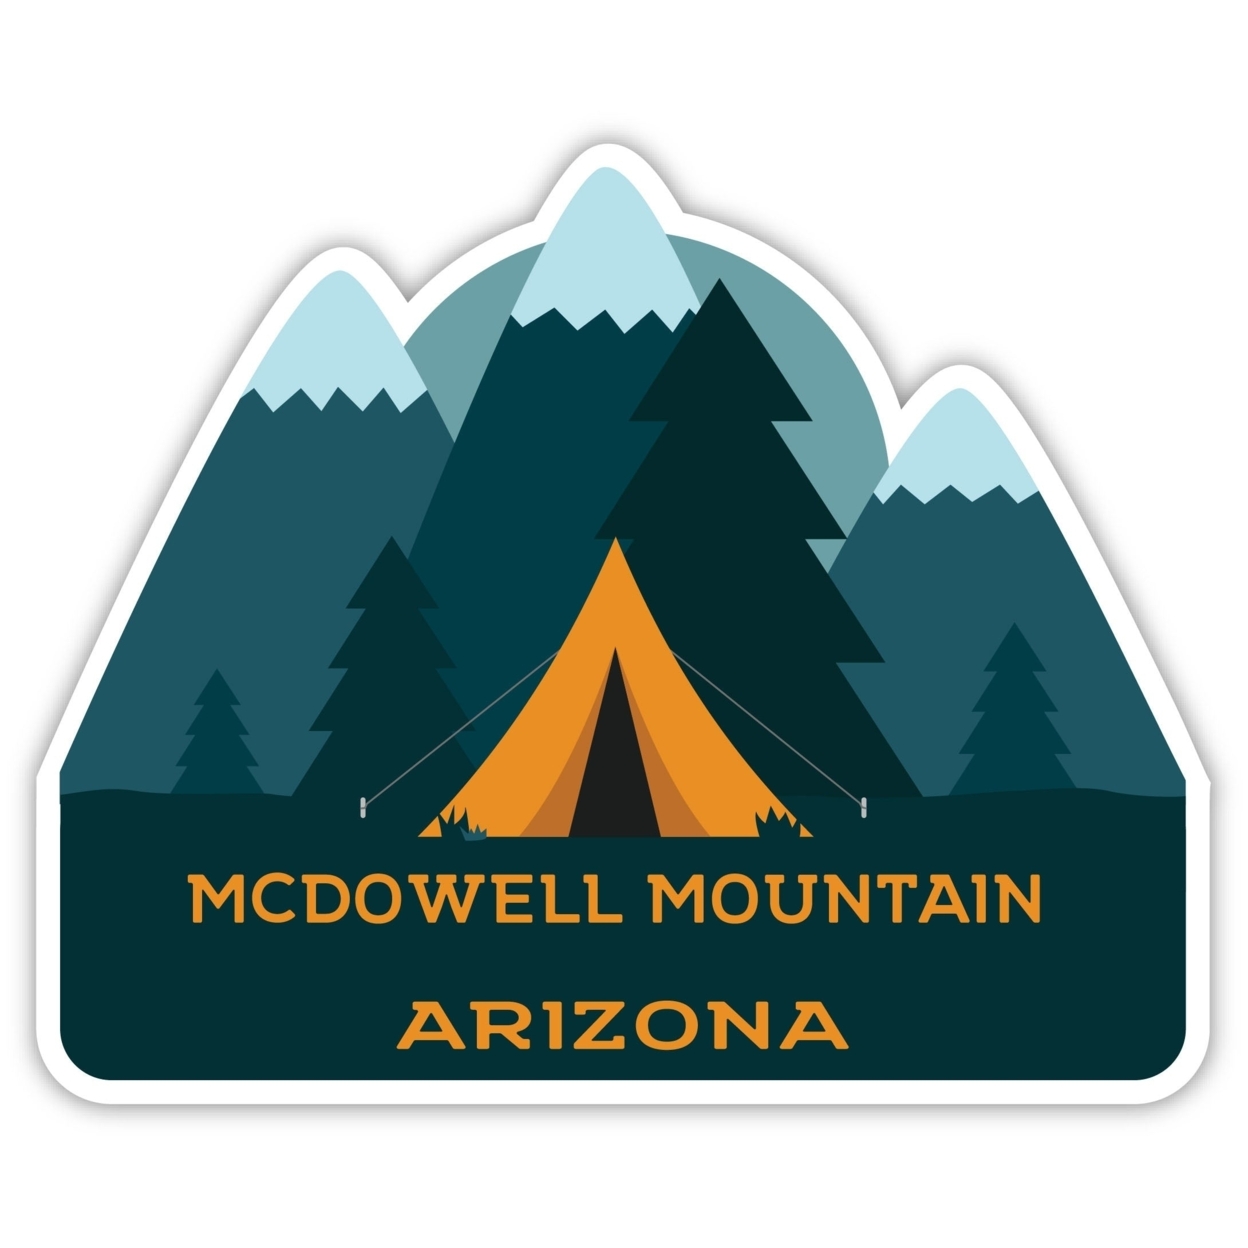 Mcdowell Mountain Arizona Souvenir Decorative Stickers (Choose Theme And Size) - 4-Inch, Tent